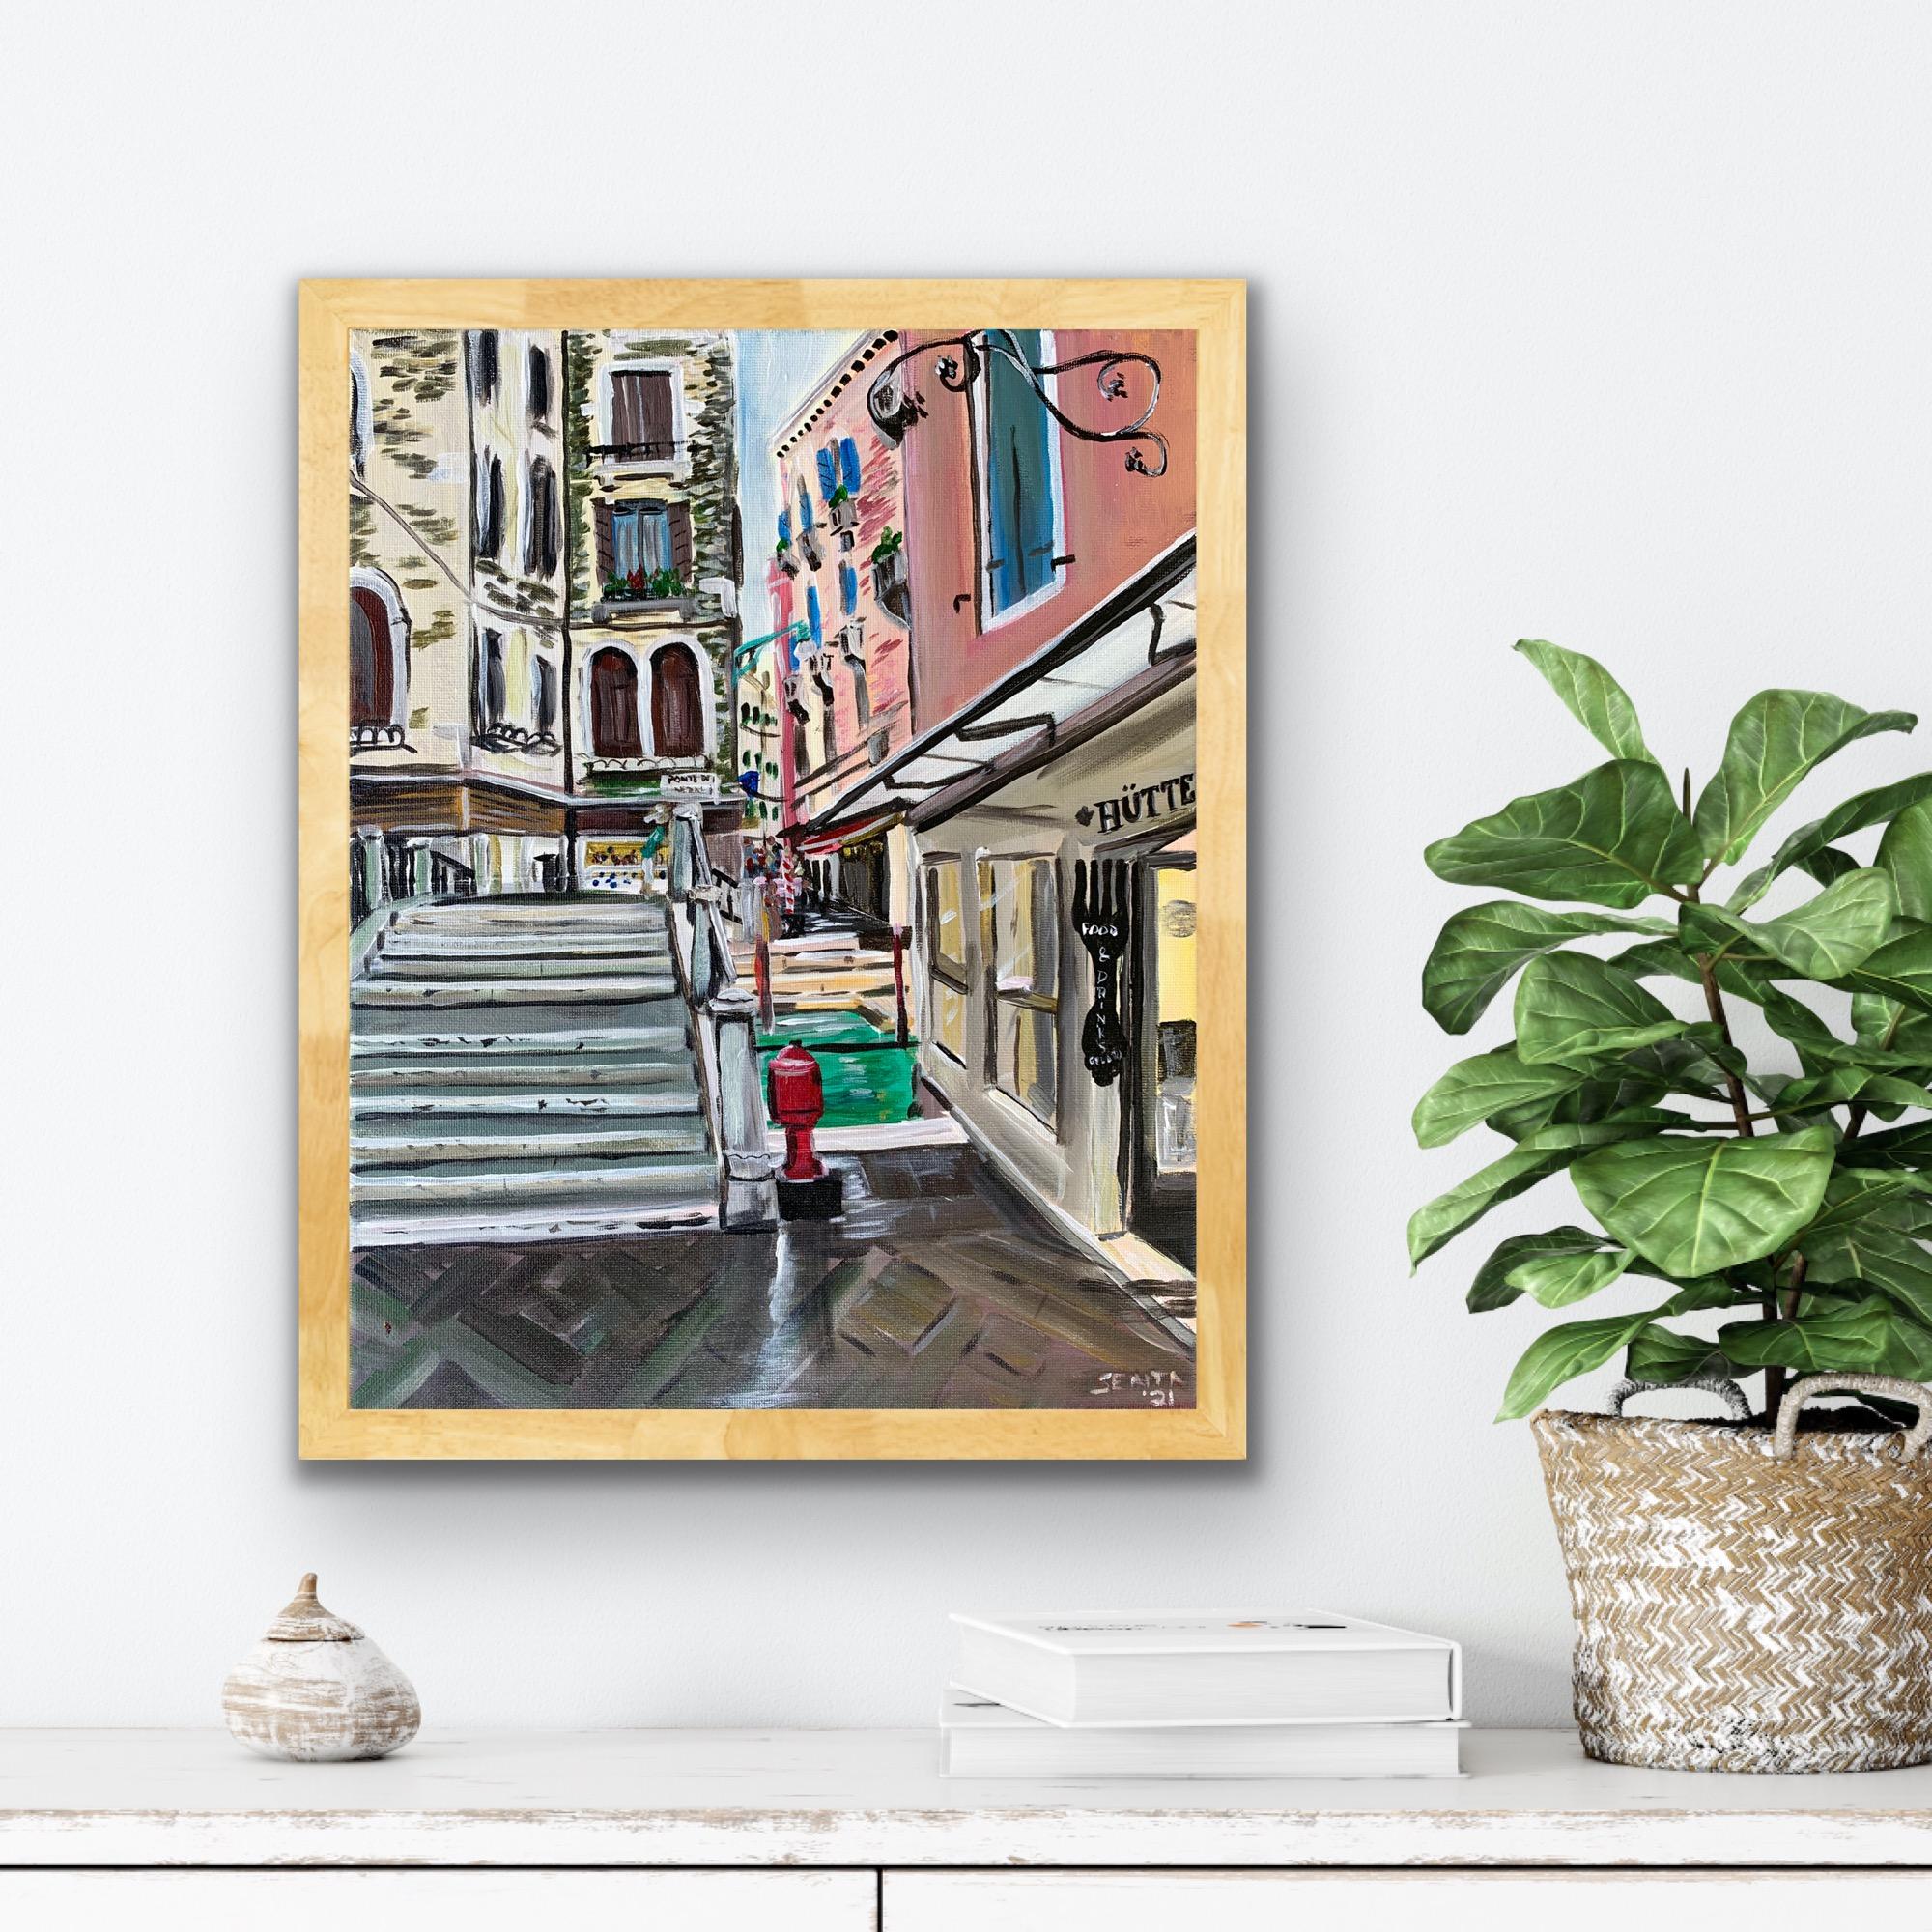 Spring in Venice
11.0 x 14.0 x 0.75, 0.5 lbs 
Acrylic 
Hand signed by artist 

Artist's Commentary: 
